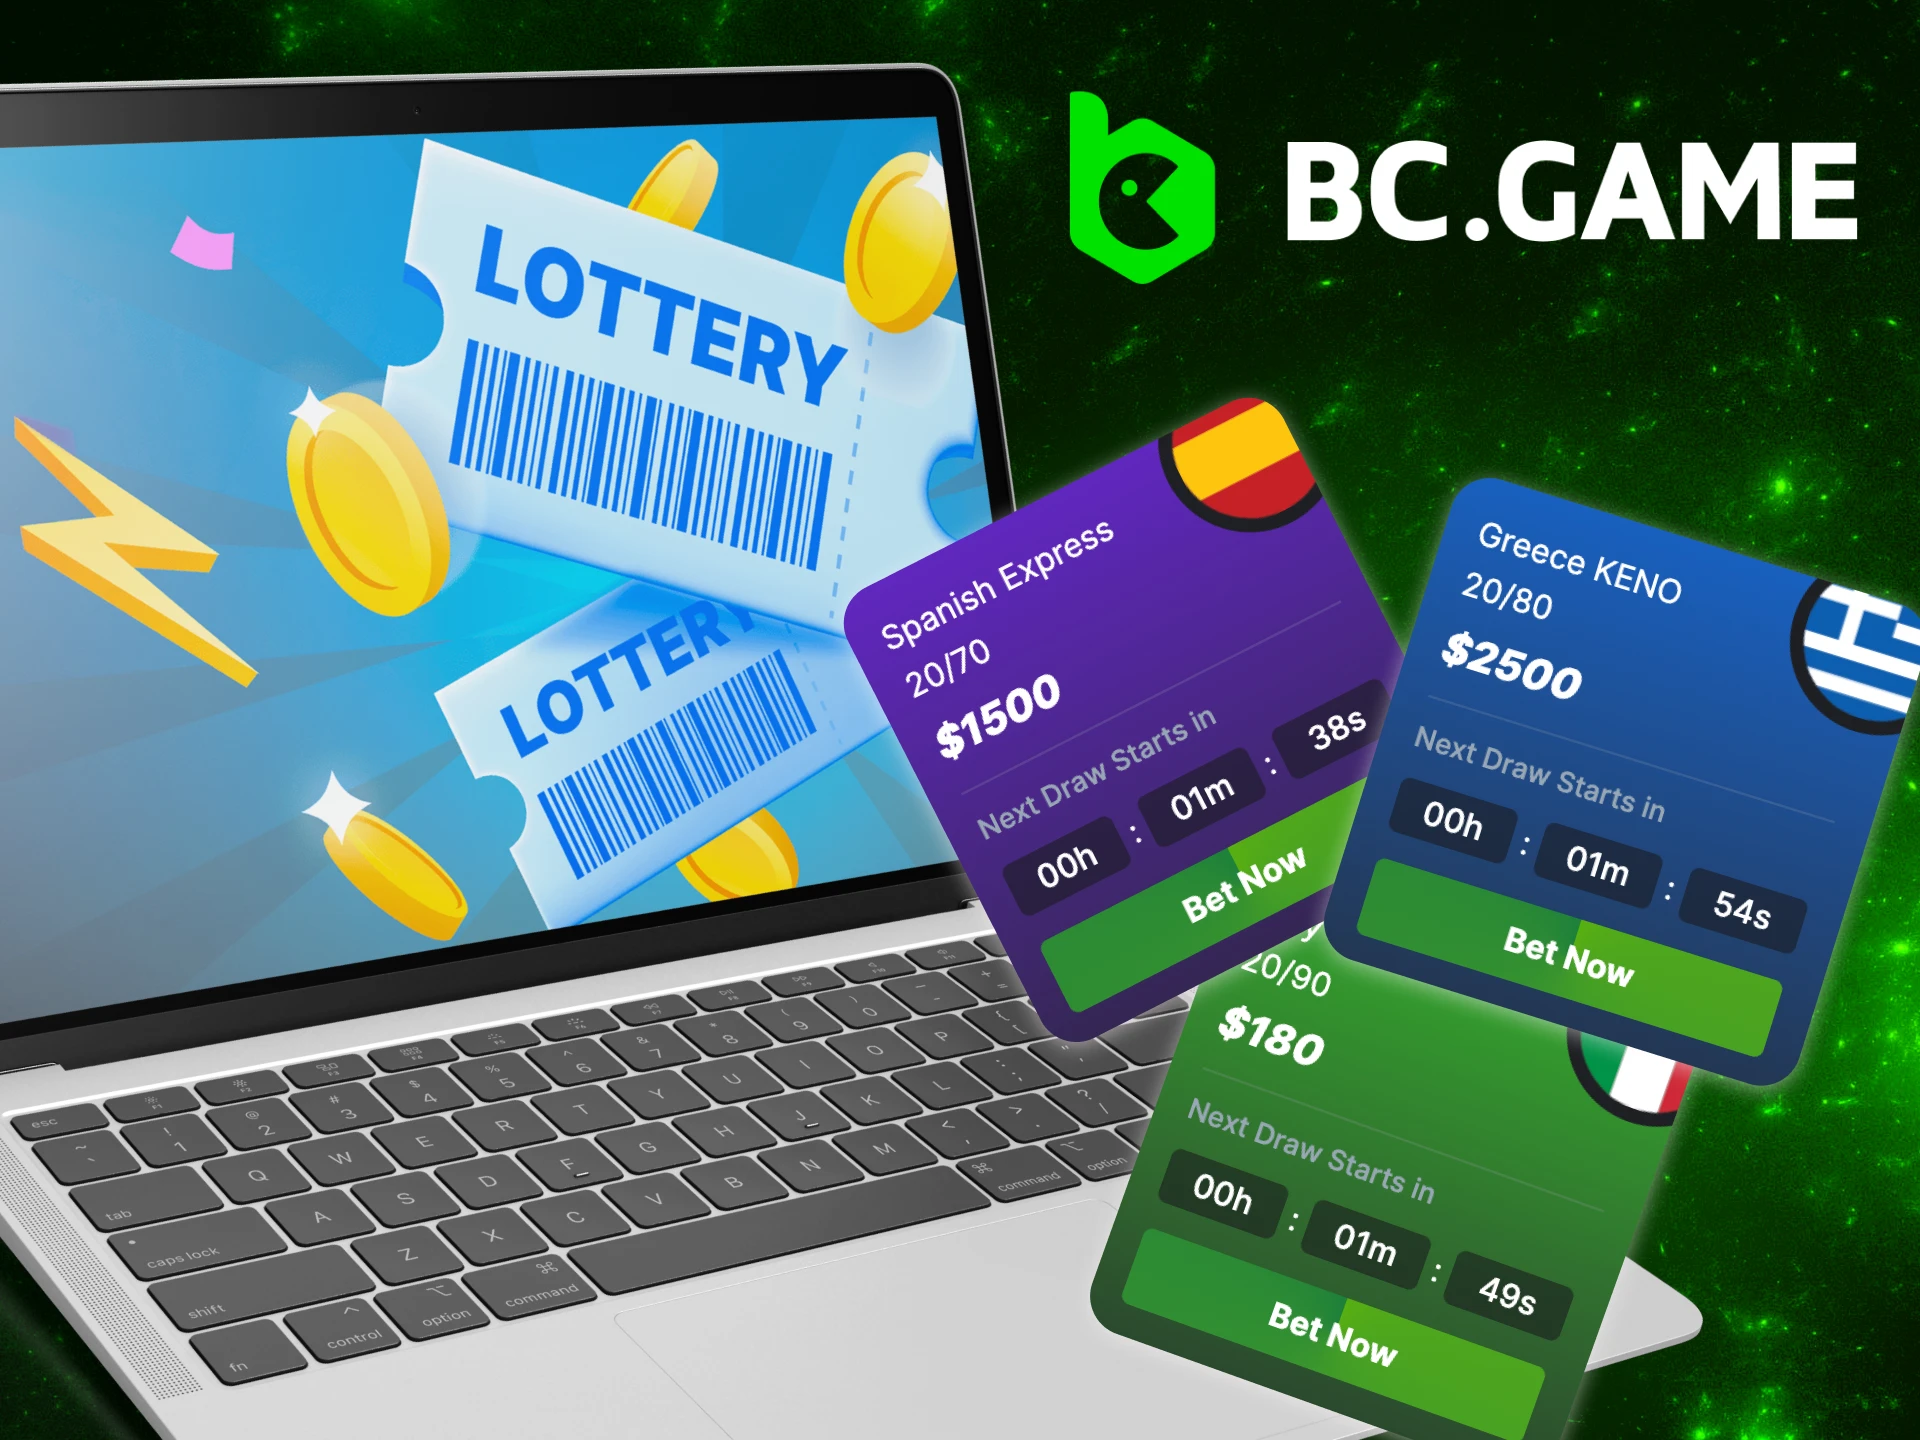 What types of lotteries are there on the BC Game casino website.